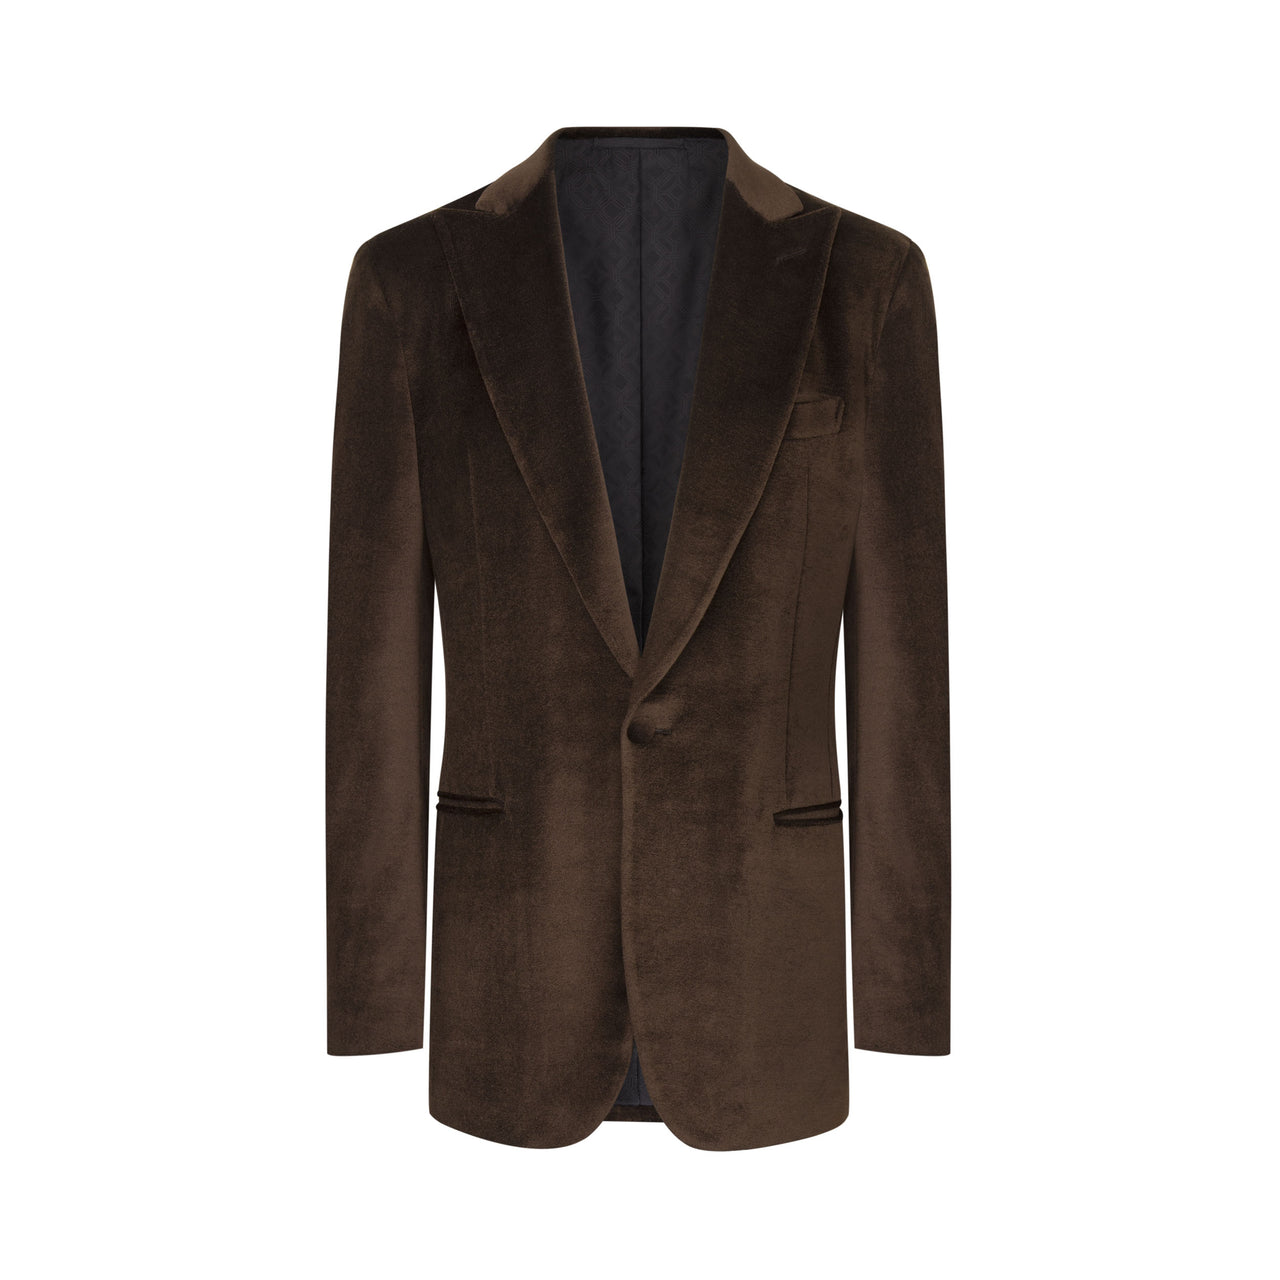 STEFANO RICCI Woven One Button Jacket BROWN